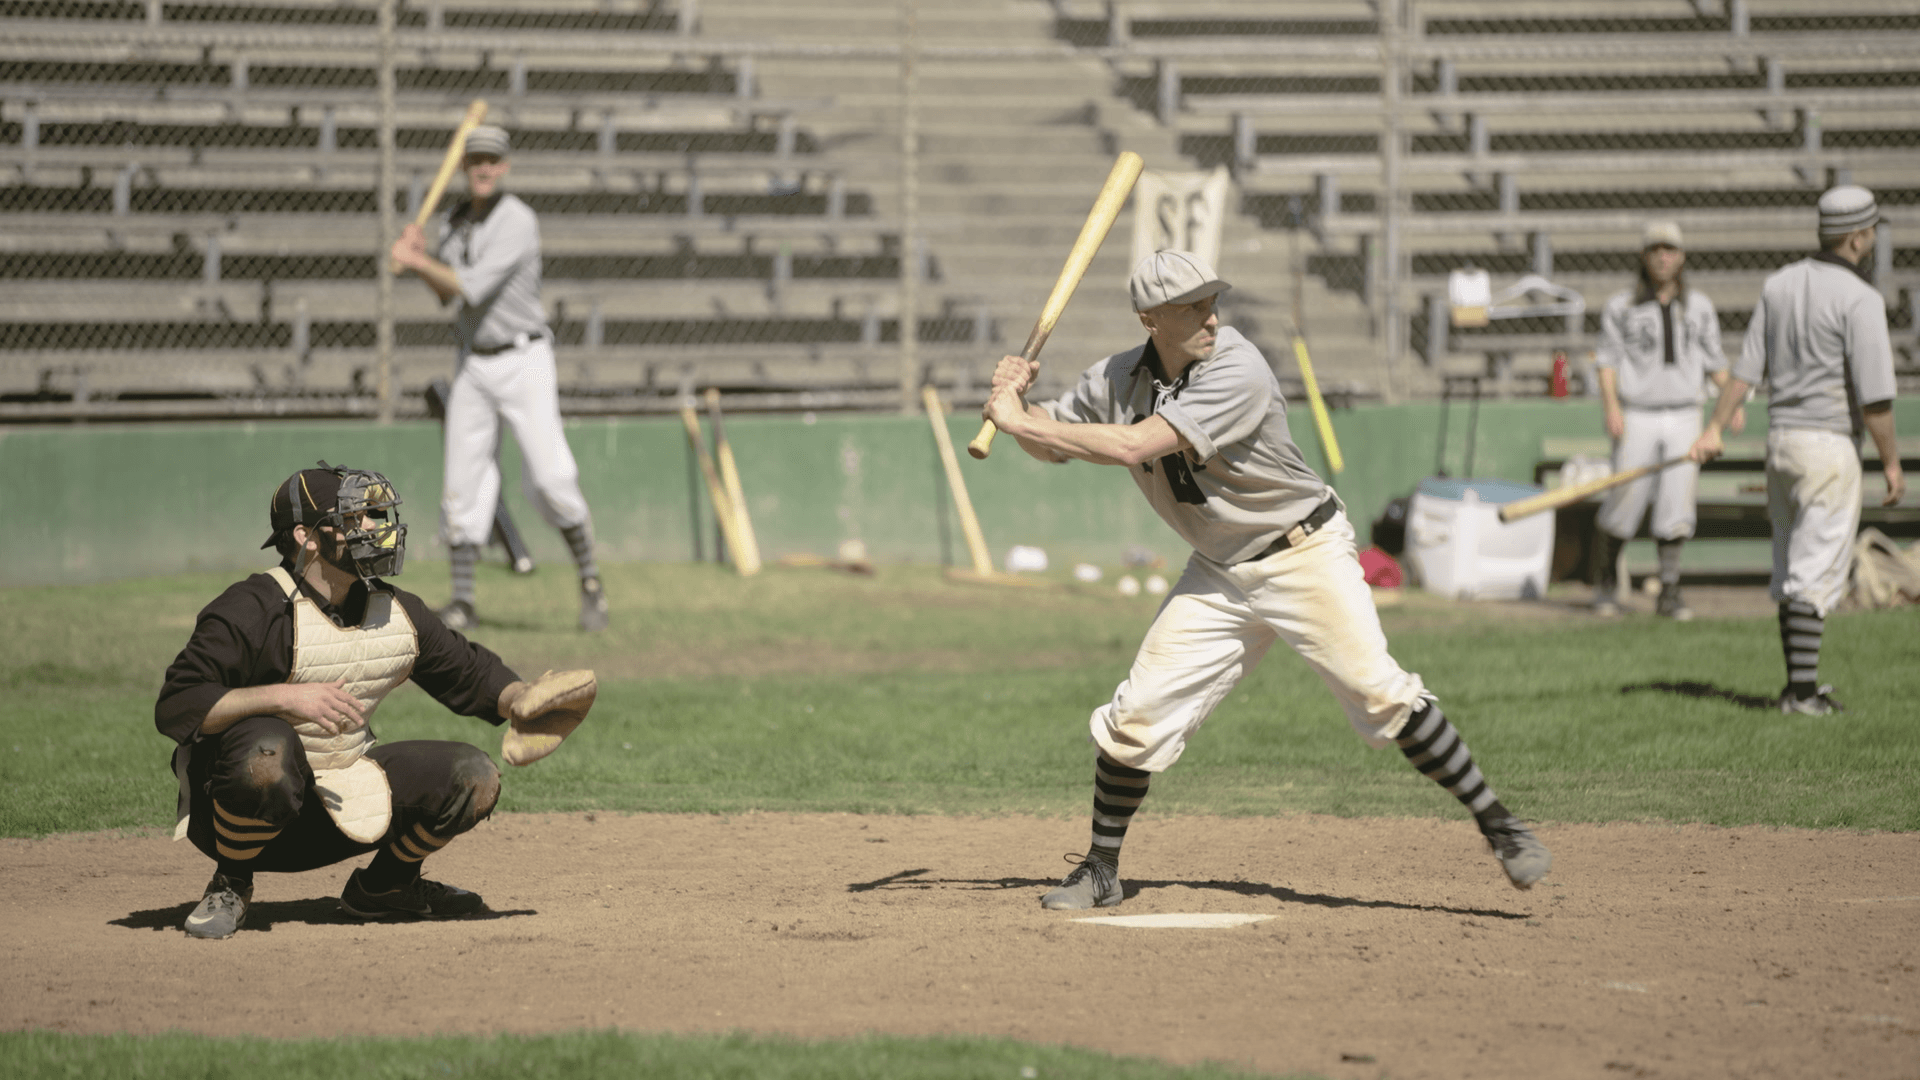 Balls, Bats, and Top Hats: These S.F. Baseball Teams Play by 1886 Rules